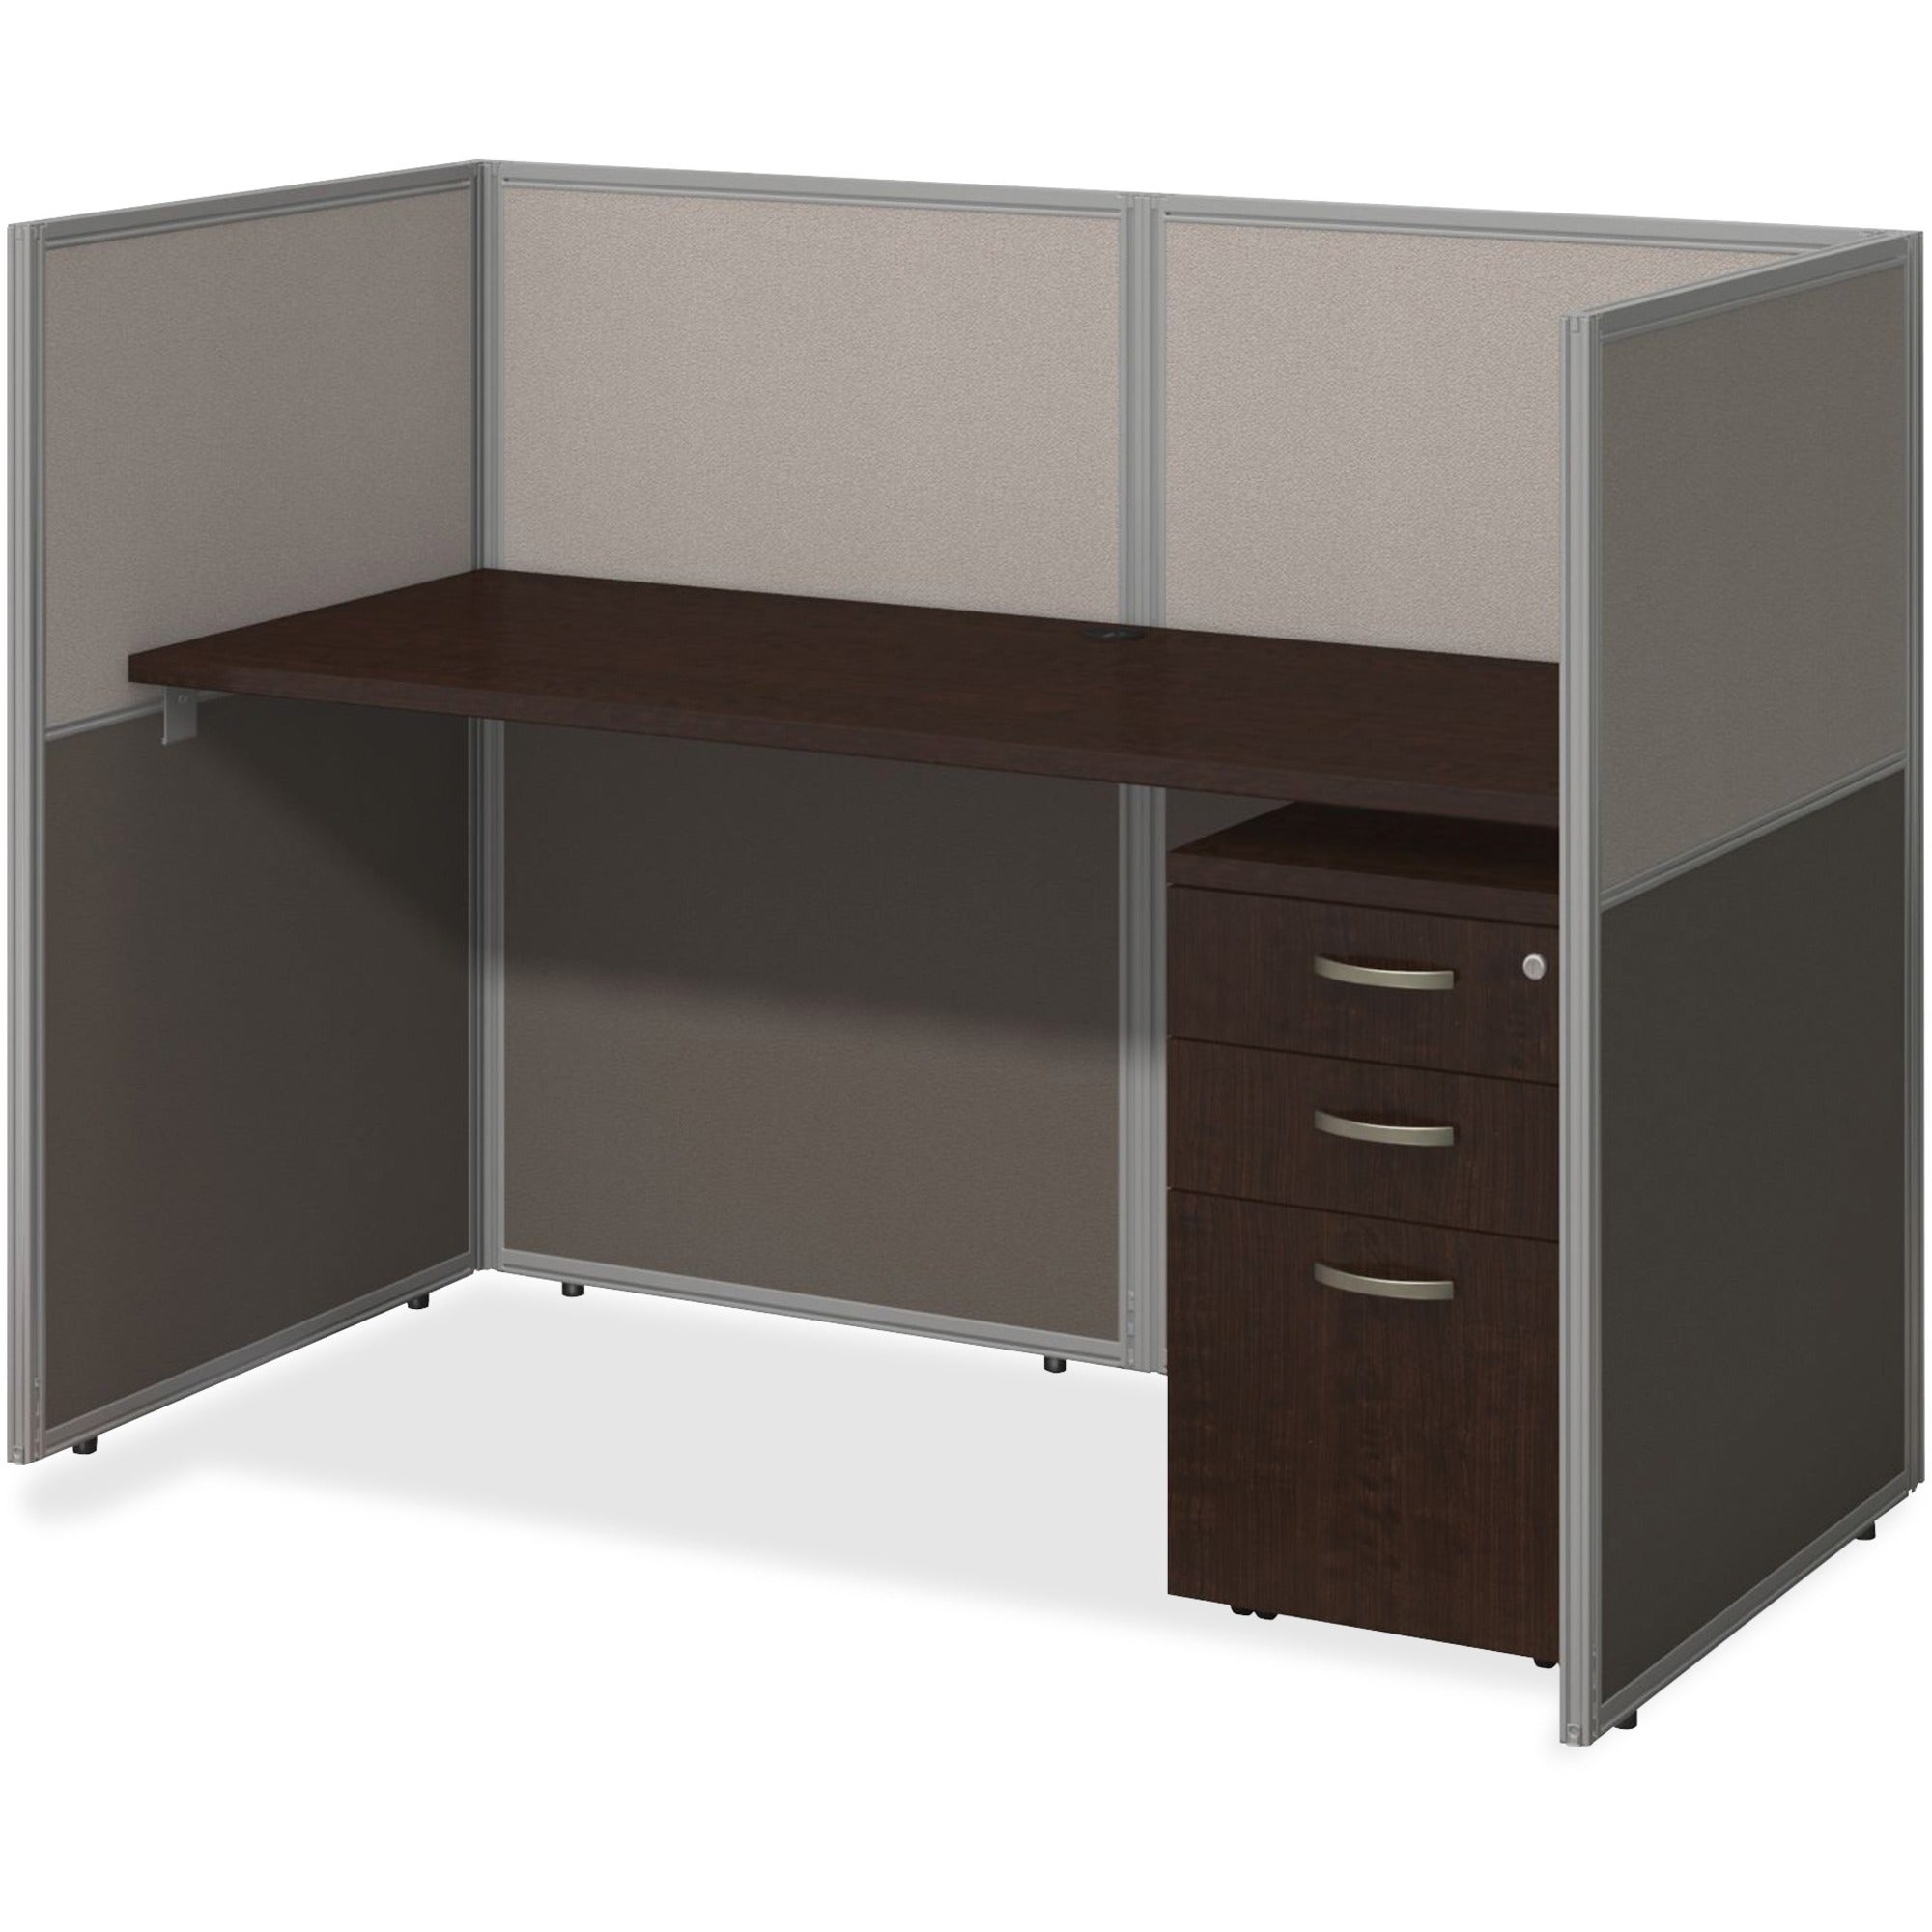 Bush Business Furniture Easy Office 60W Stght Desk Closed Office w/3 Drawer Pedestal - For - Table TopRectangle Top - 3 Drawers x 61.02" Table Top Width x 30.51" Table Top Depth - 44.88" Height - Assembly Required - Mocha Cherry, Light Gray, Storm Gr - 1